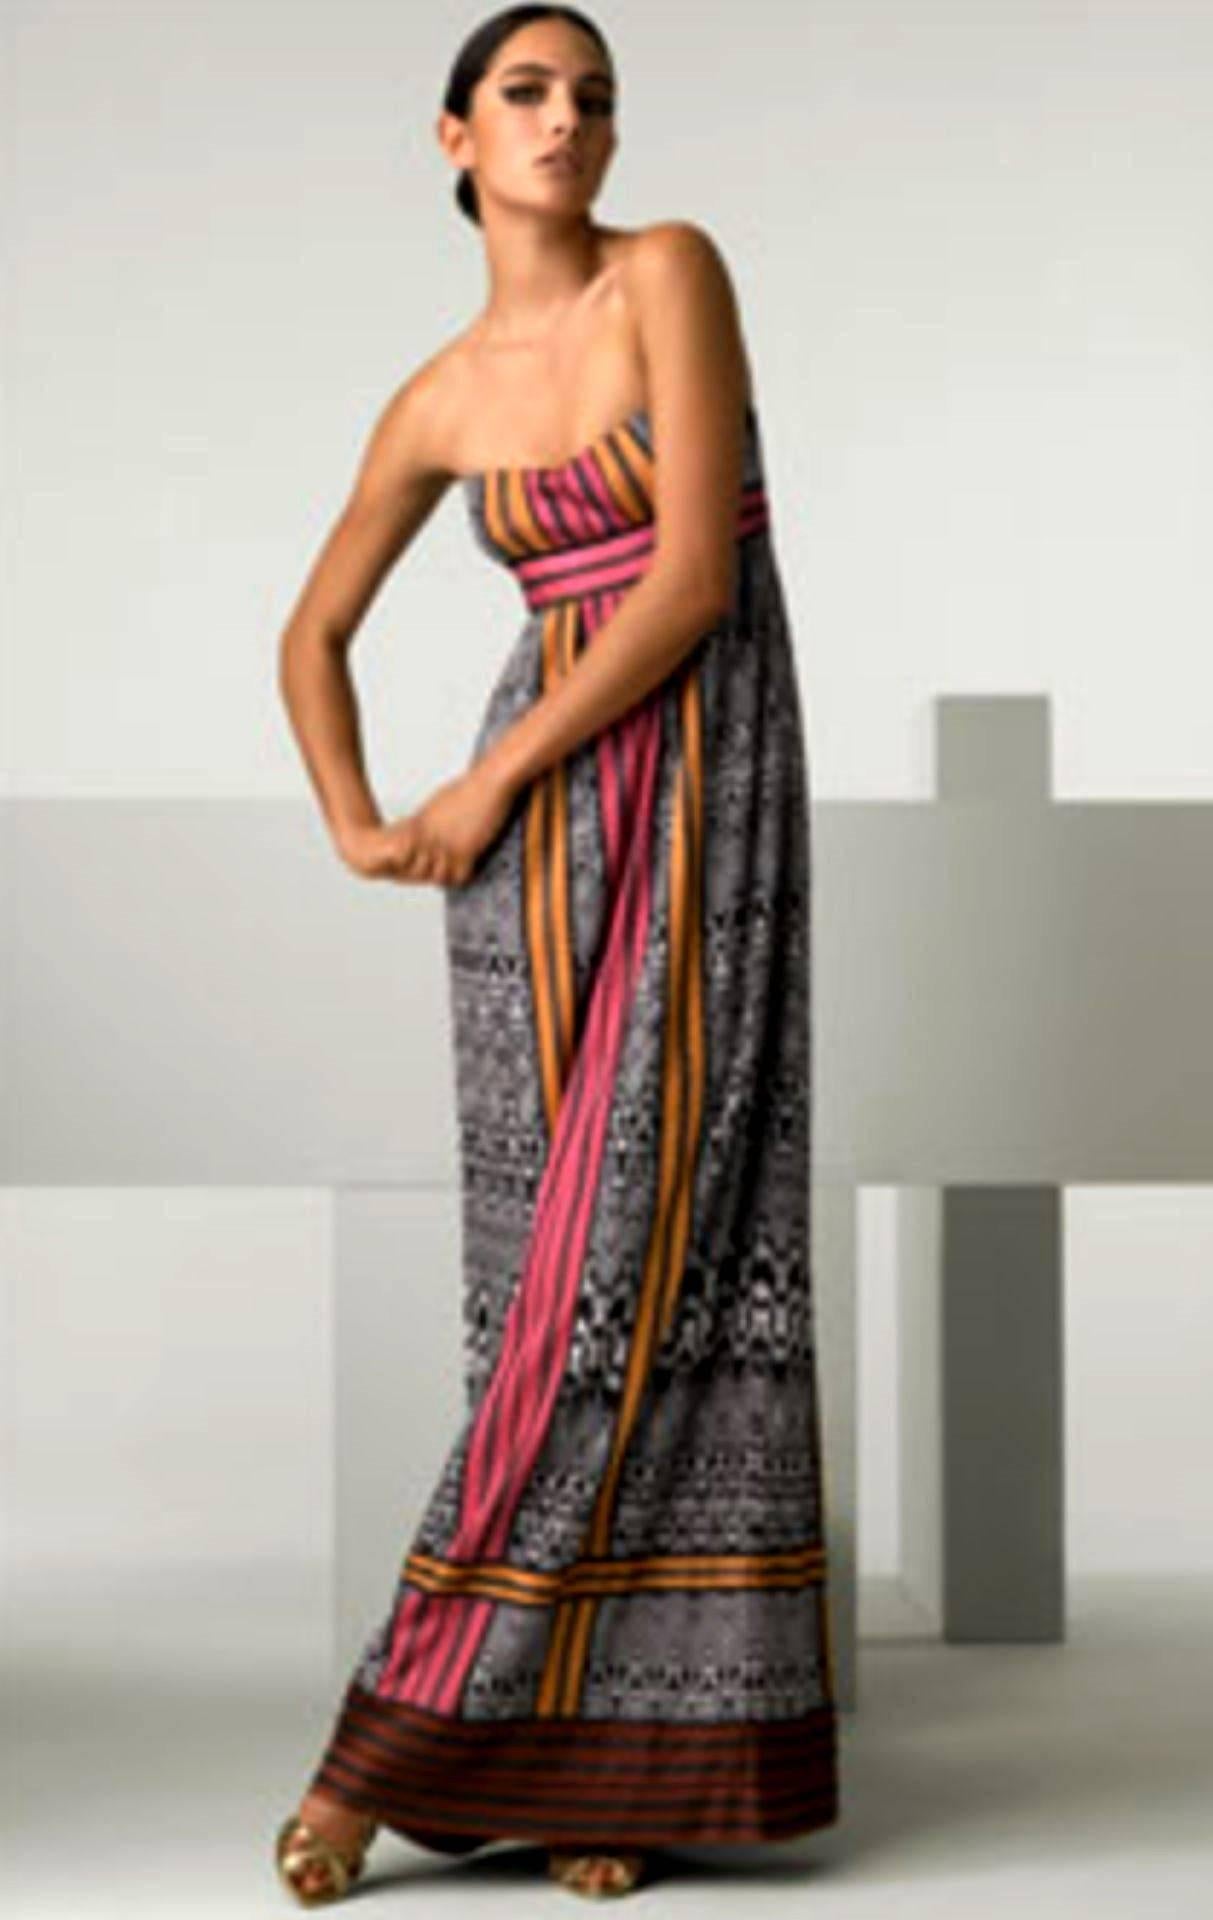 NEW Missoni Monochrome Crochet Knit Maxi Dress Gown with Colorblock Trimming 1